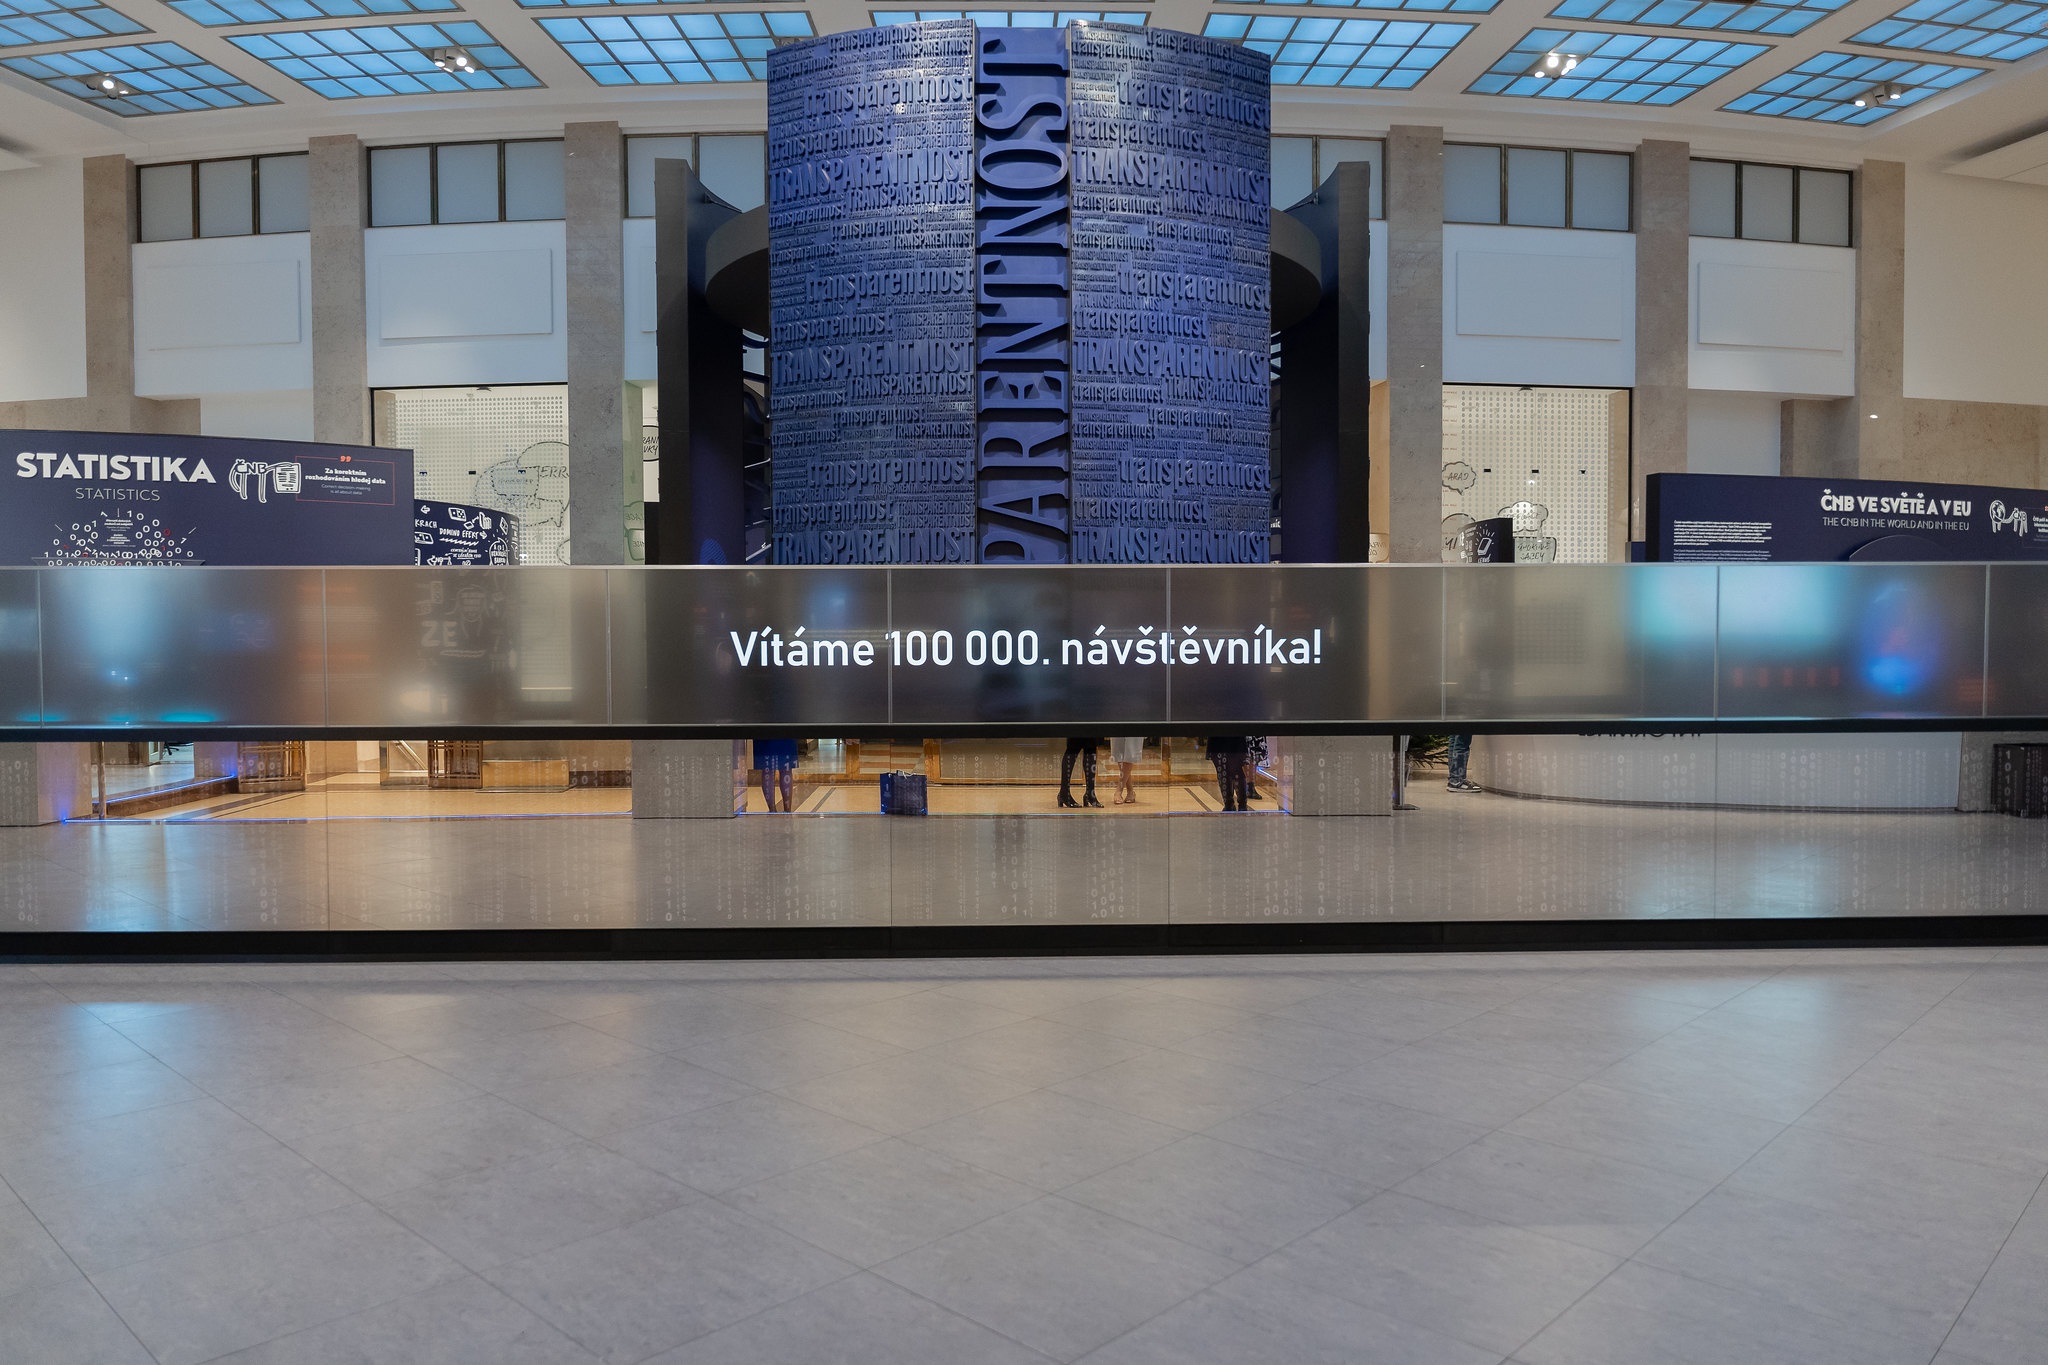 CNB Visitor Centre welcomes its 100,000th visitor!